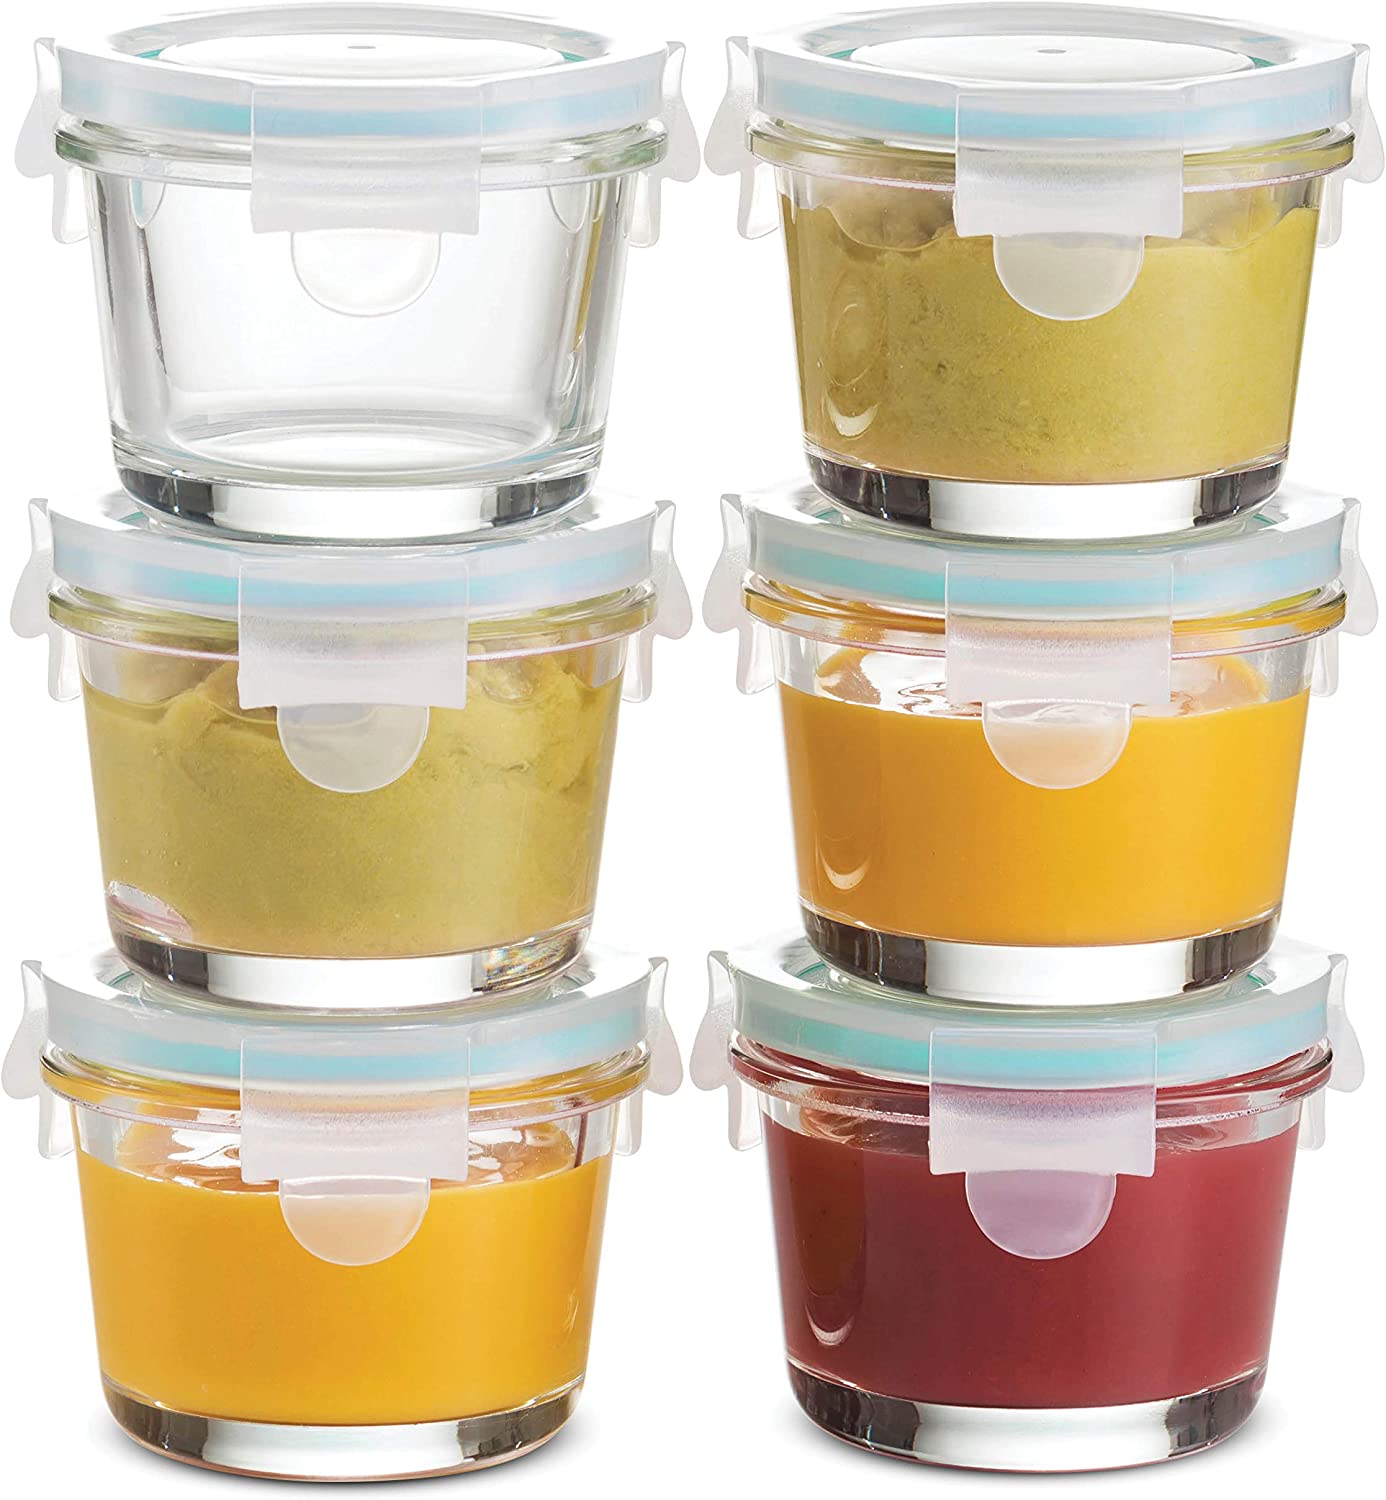 FineDine 24-Piece Superior Glass Food Storage Containers Set - Newly Innovated Hinged Locking Lids - 100 Leakproof Glass Meal-Prep Containers, Great